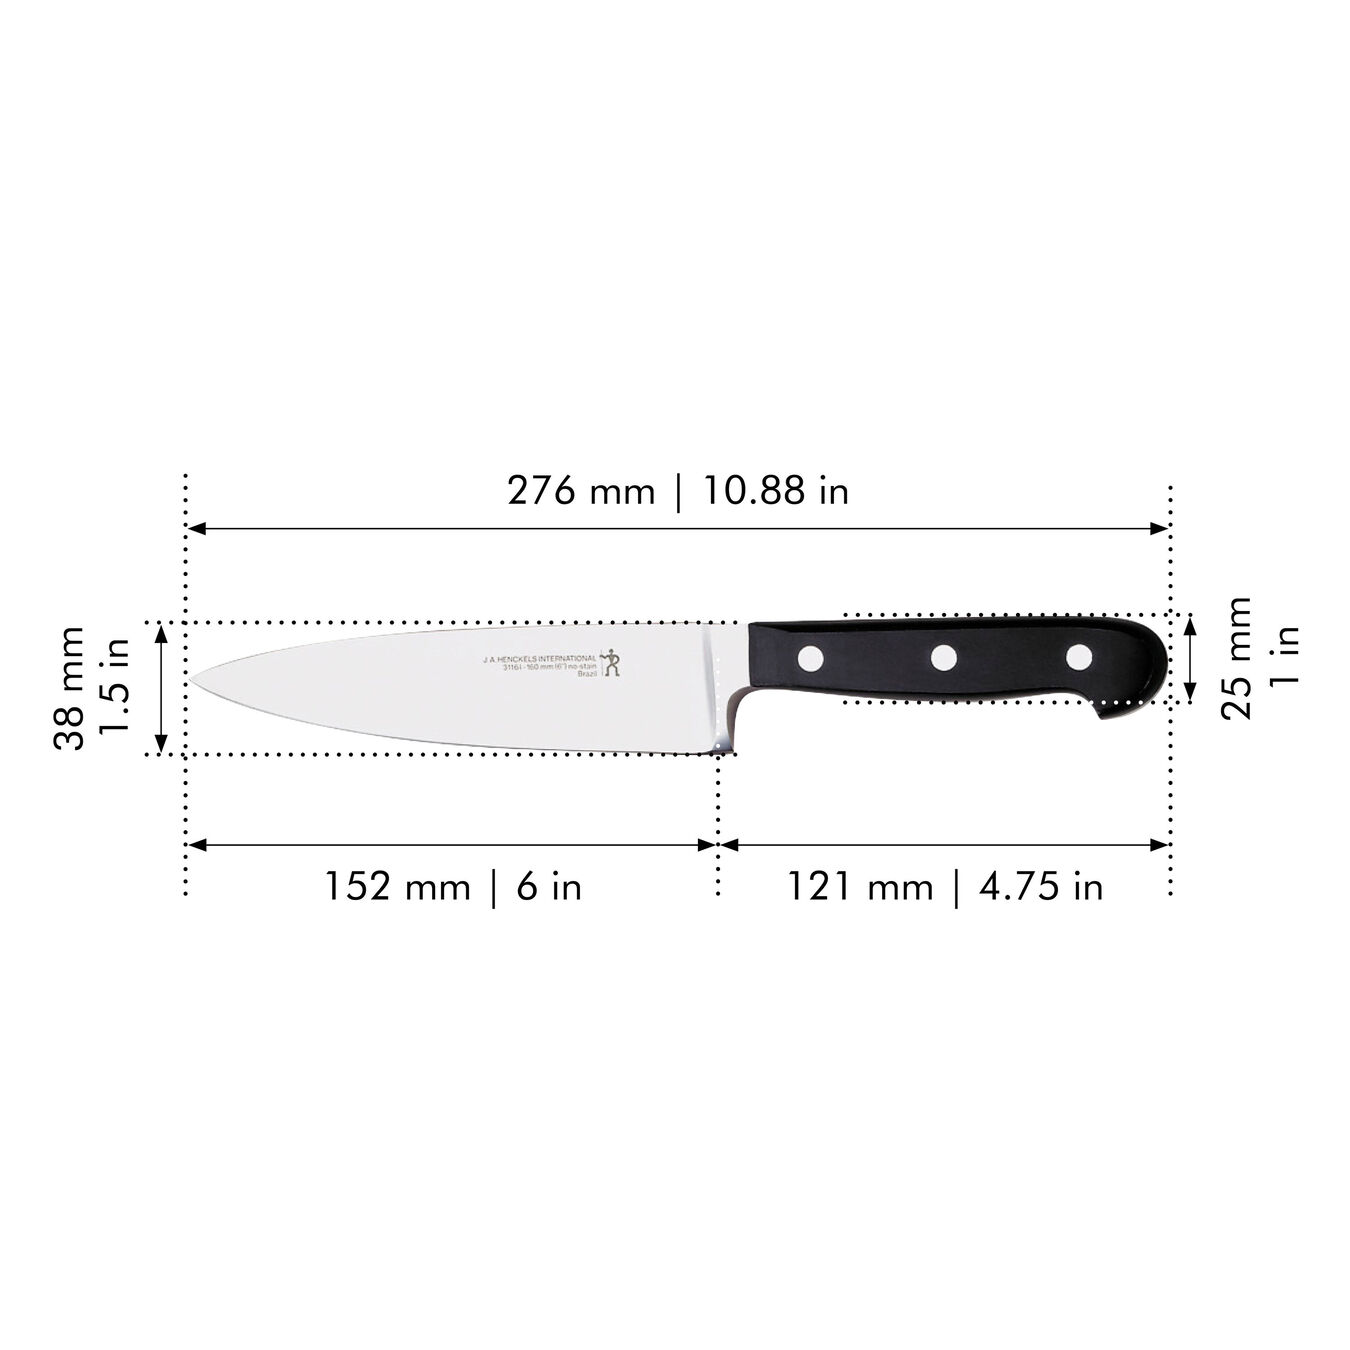 6-inch, Chef's knife,,large 2